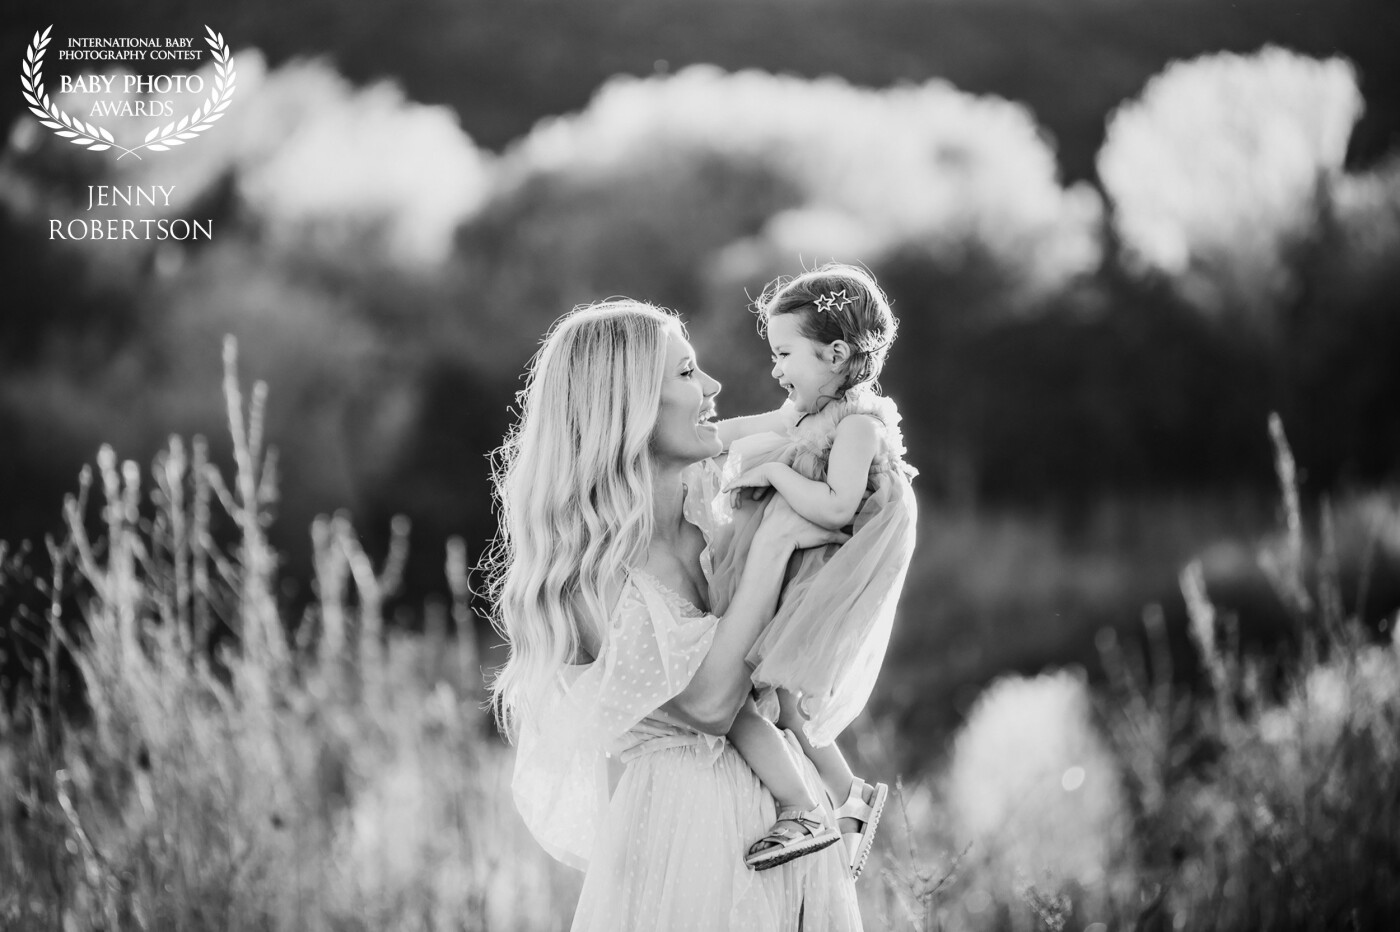 I love capturing the connection between mothers and their children. This image captures so much love and joy and is just dreamy and timeless in black and white.